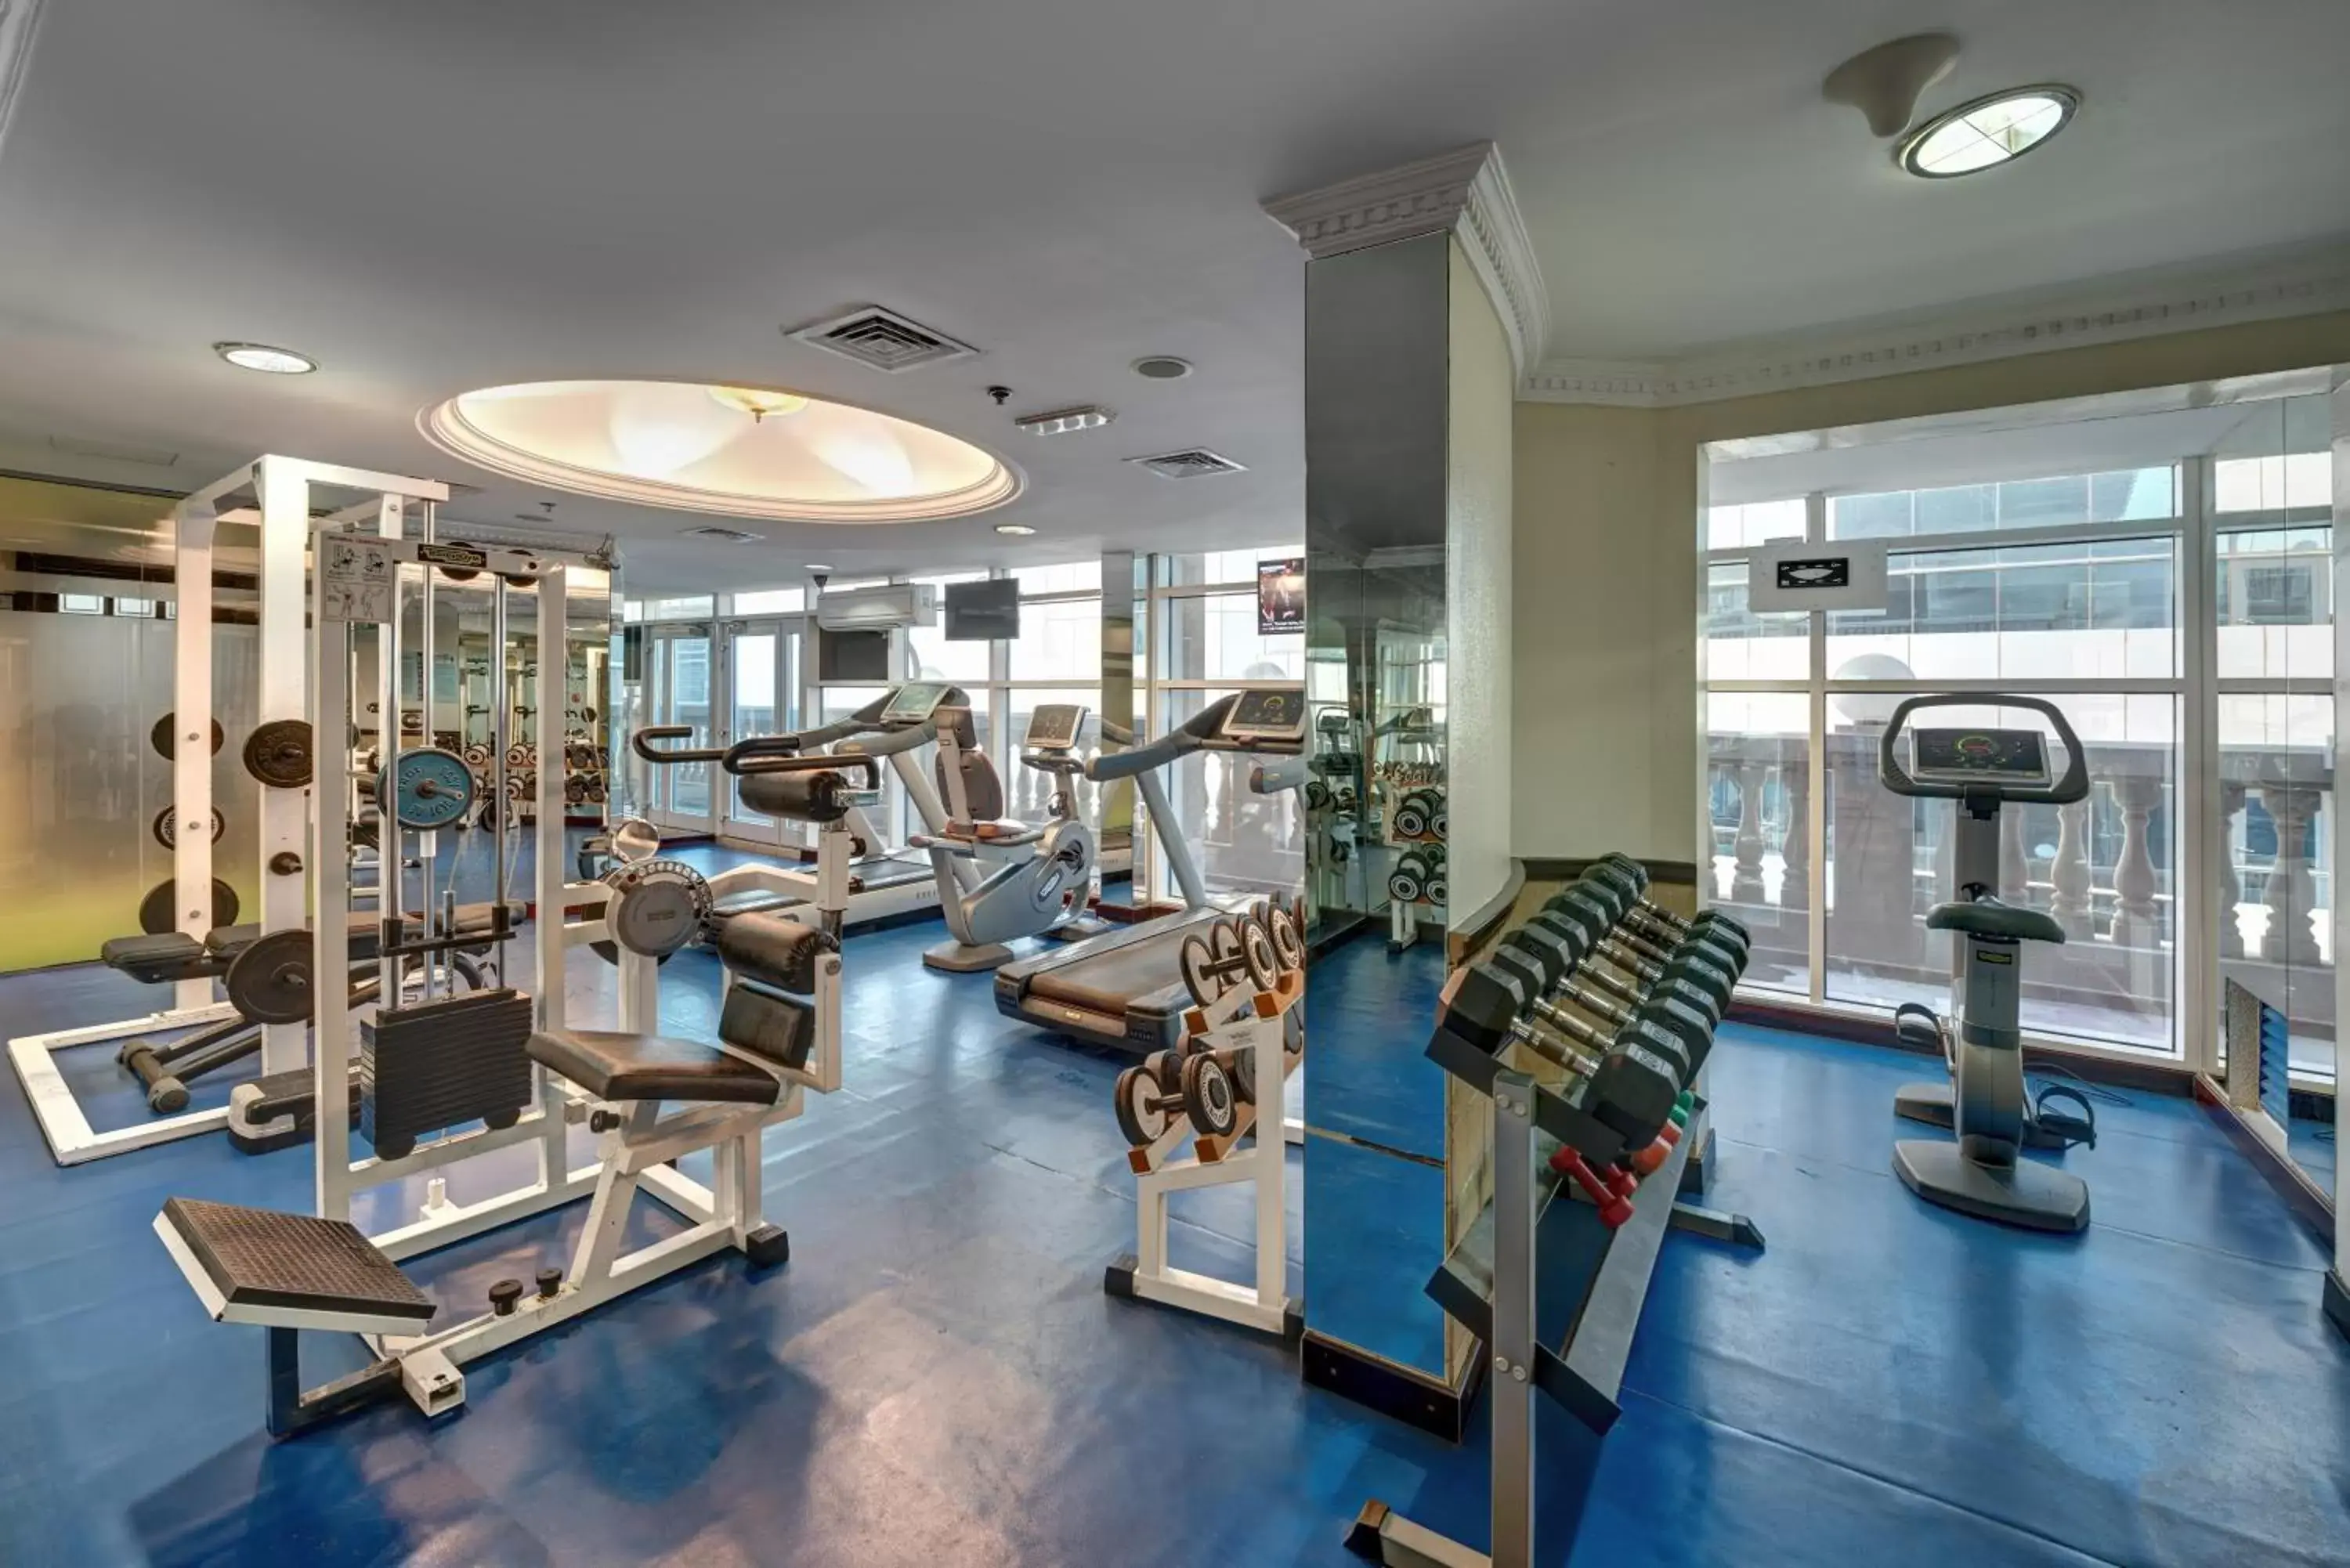 Fitness centre/facilities, Fitness Center/Facilities in Emirates Grand Hotel